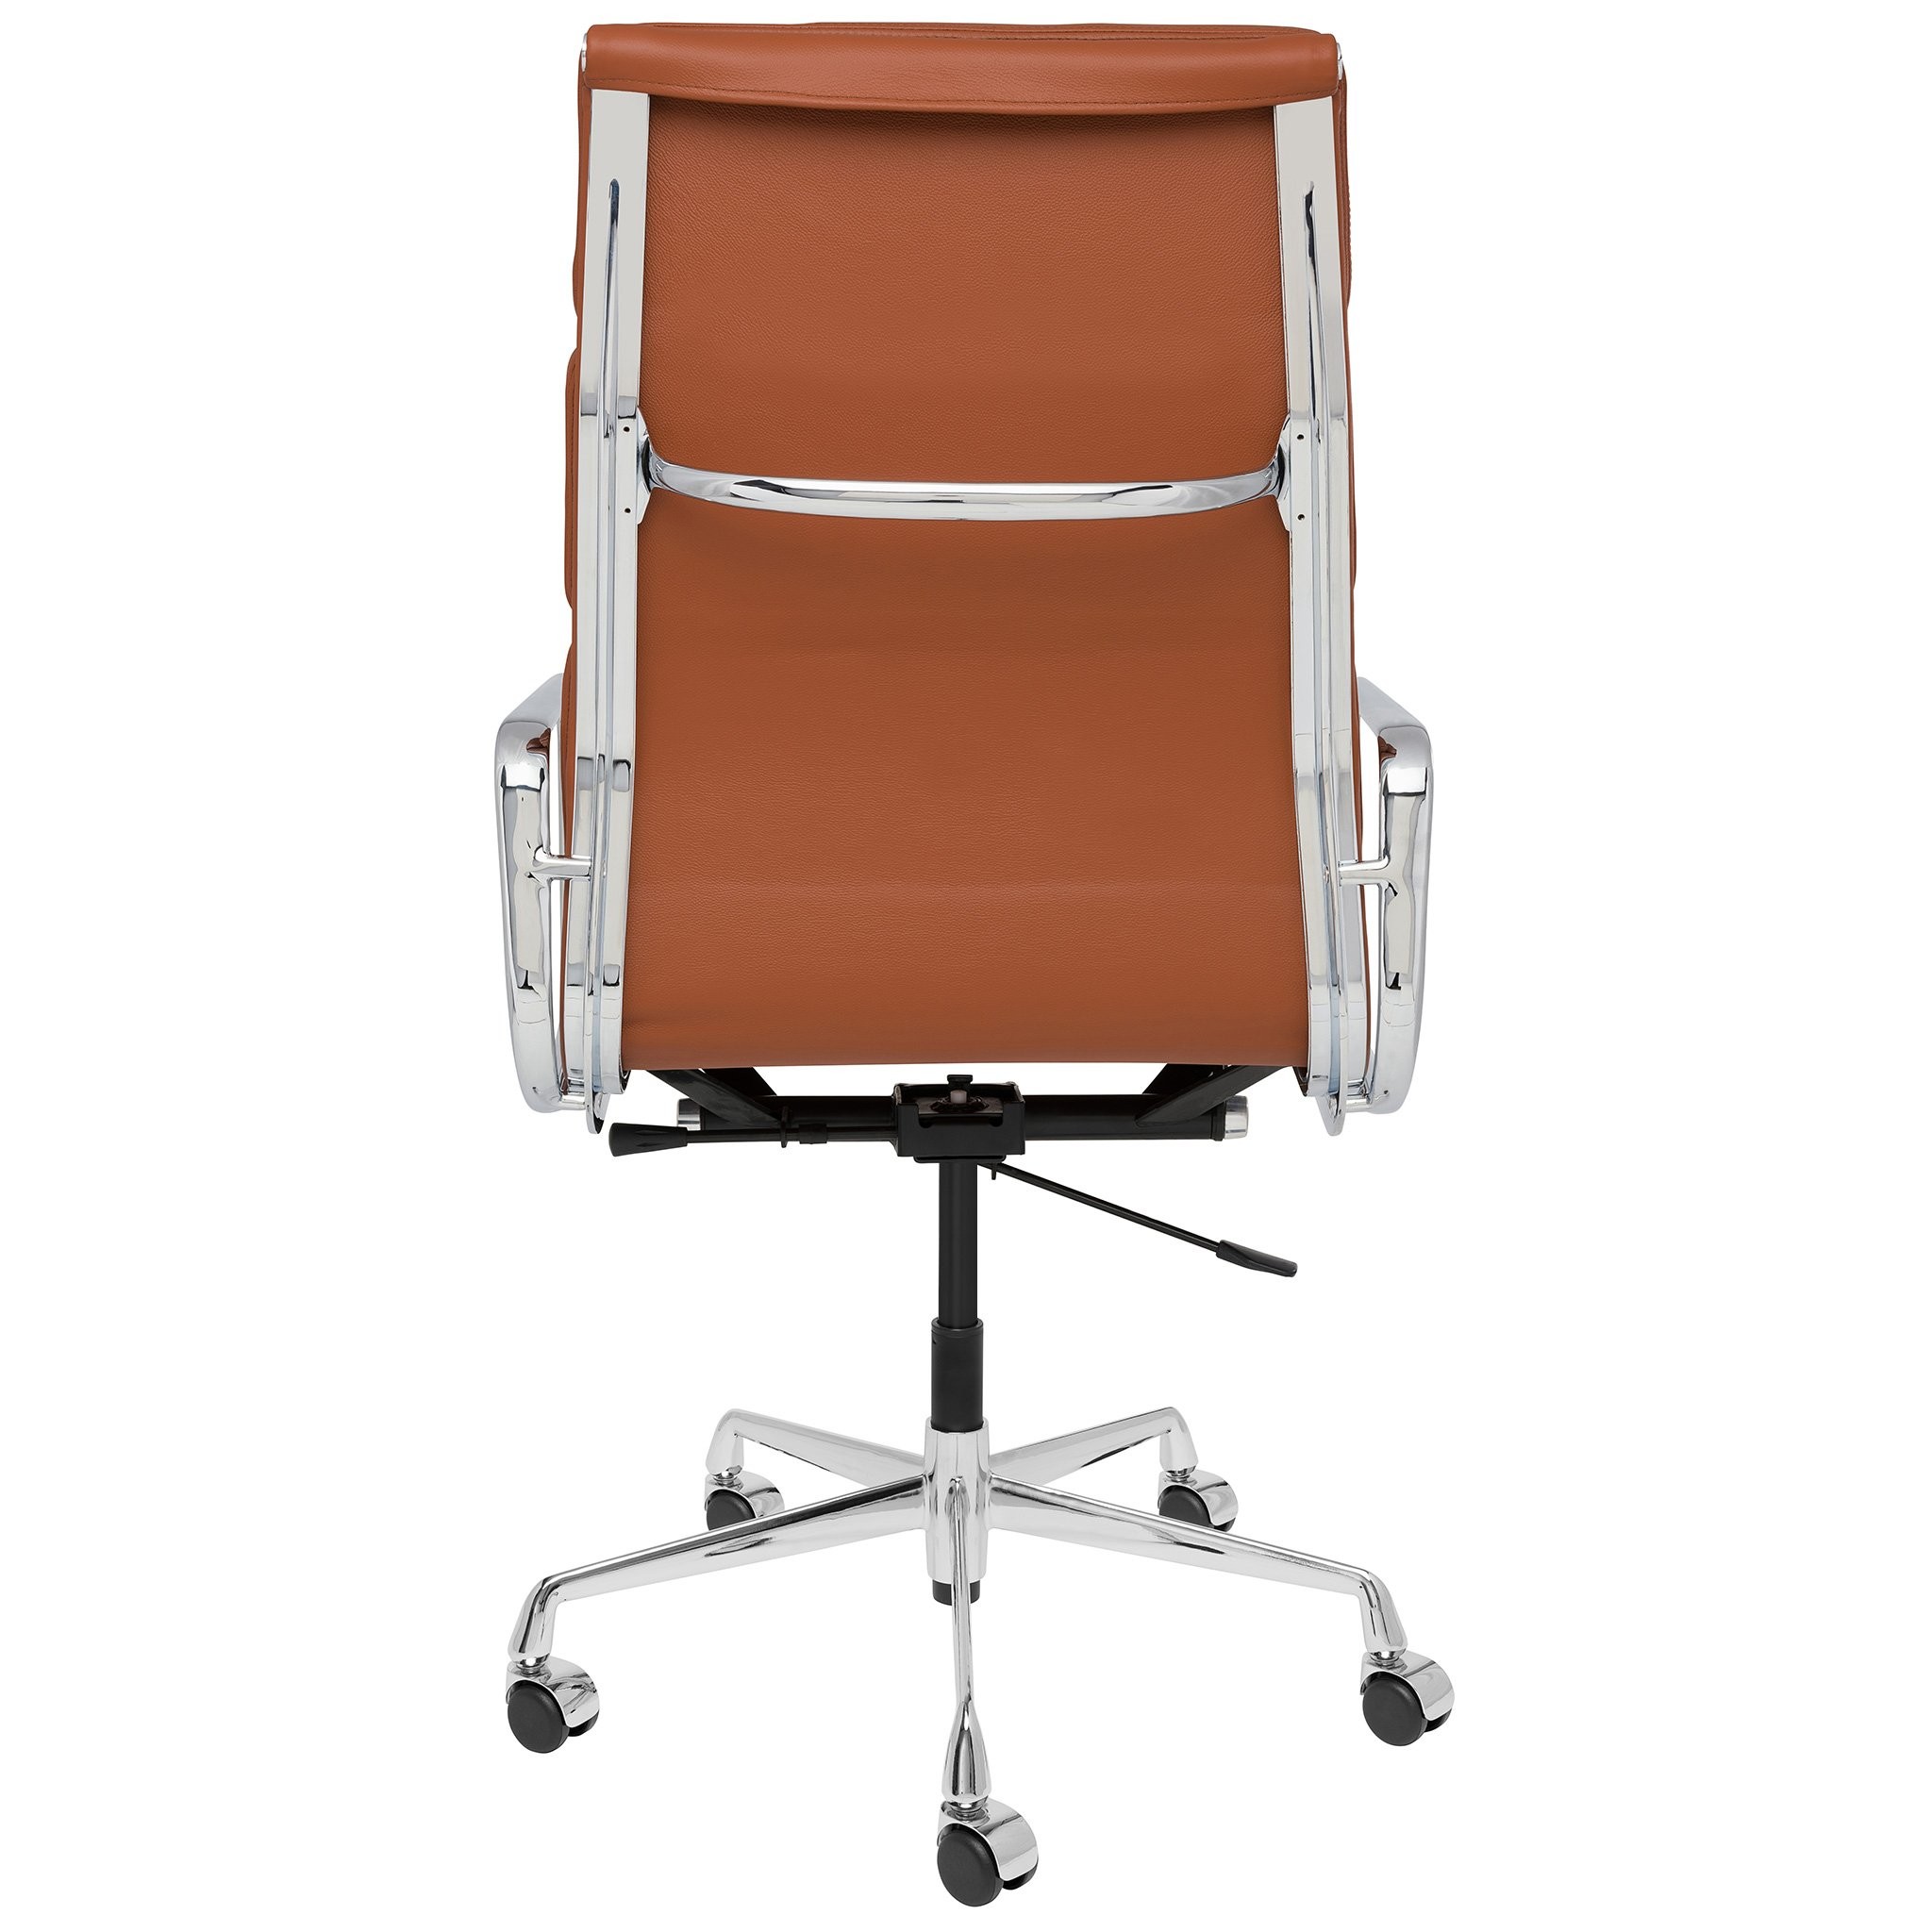 Quality High Back Swivel Soft Pad High Quality Office Chair wholesale